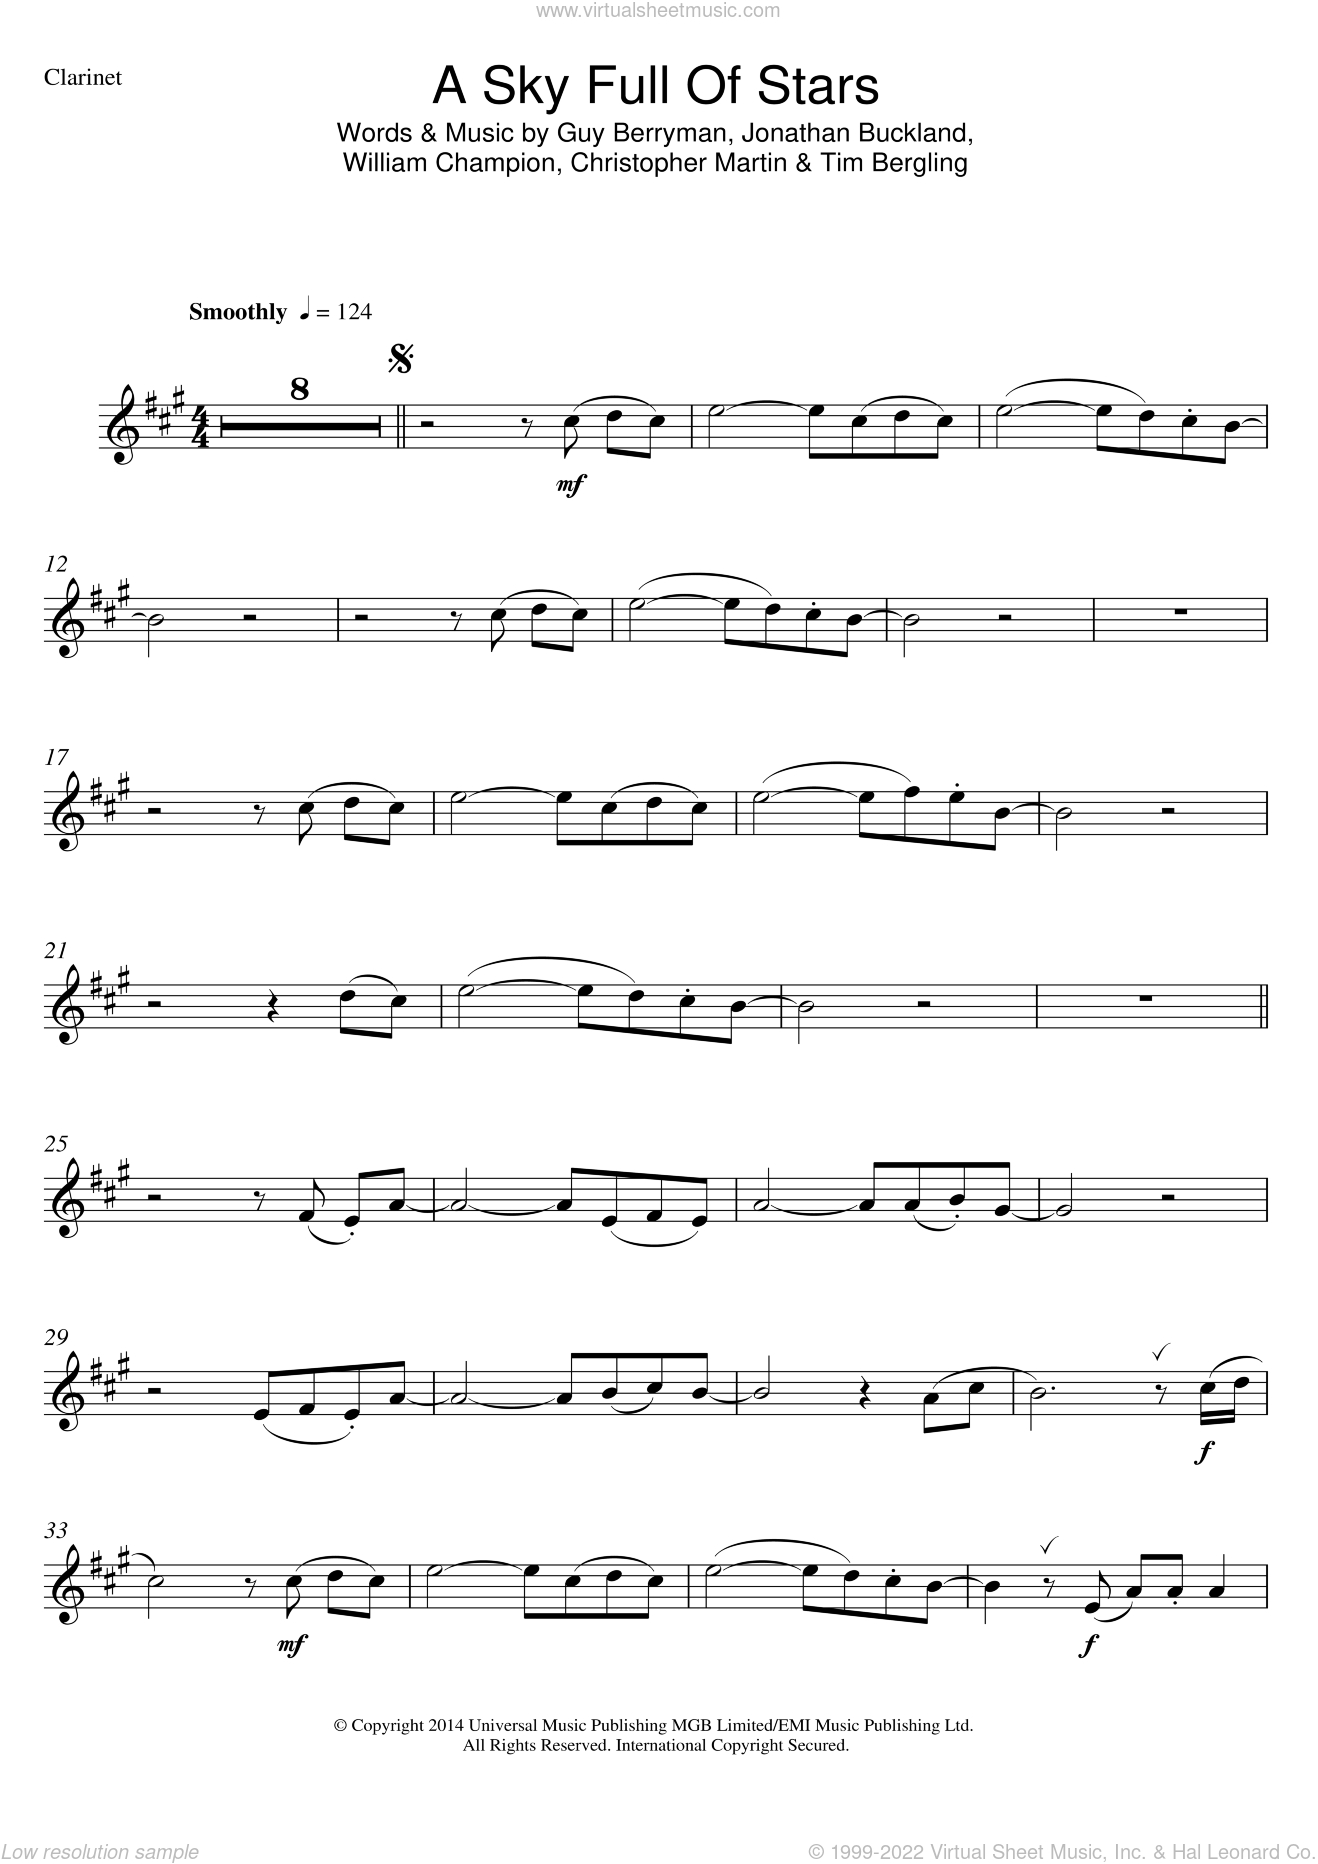 Coldplay - A Sky Full Of Stars sheet music for clarinet solo